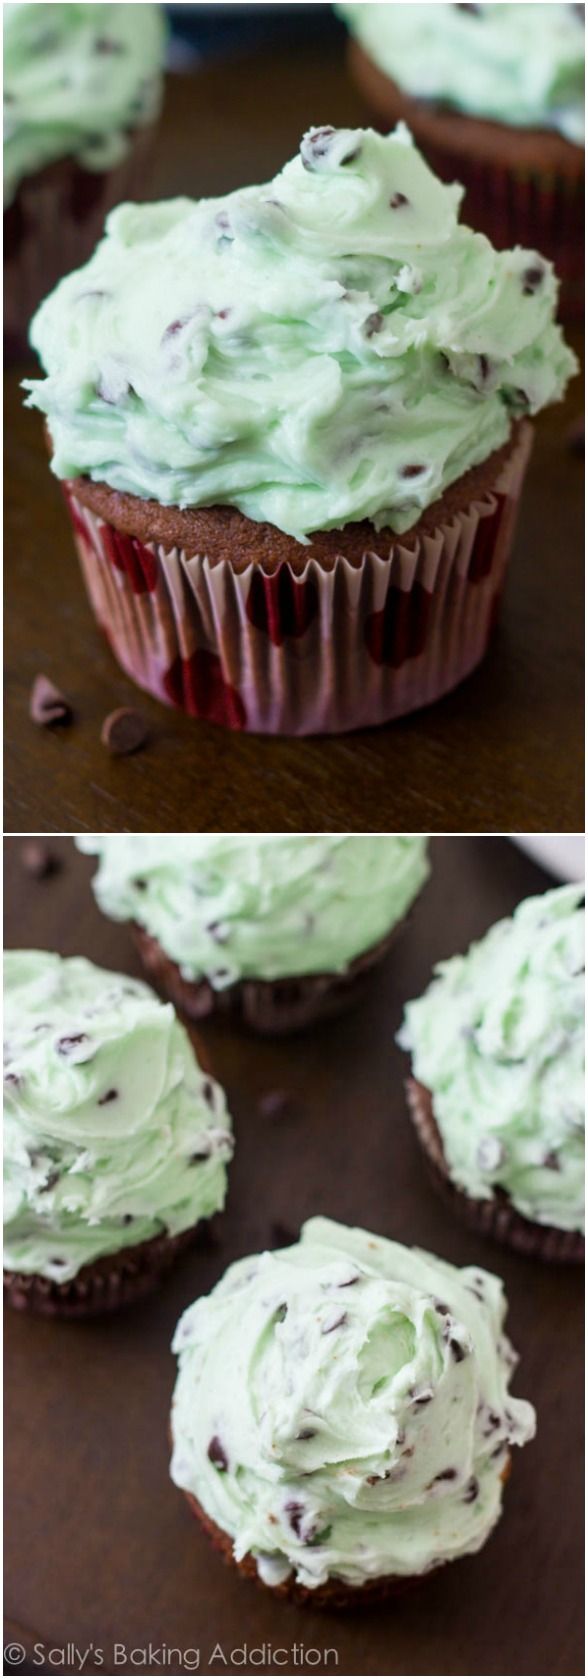 2 images of chocolate cupcakes topped with mint chip frosting